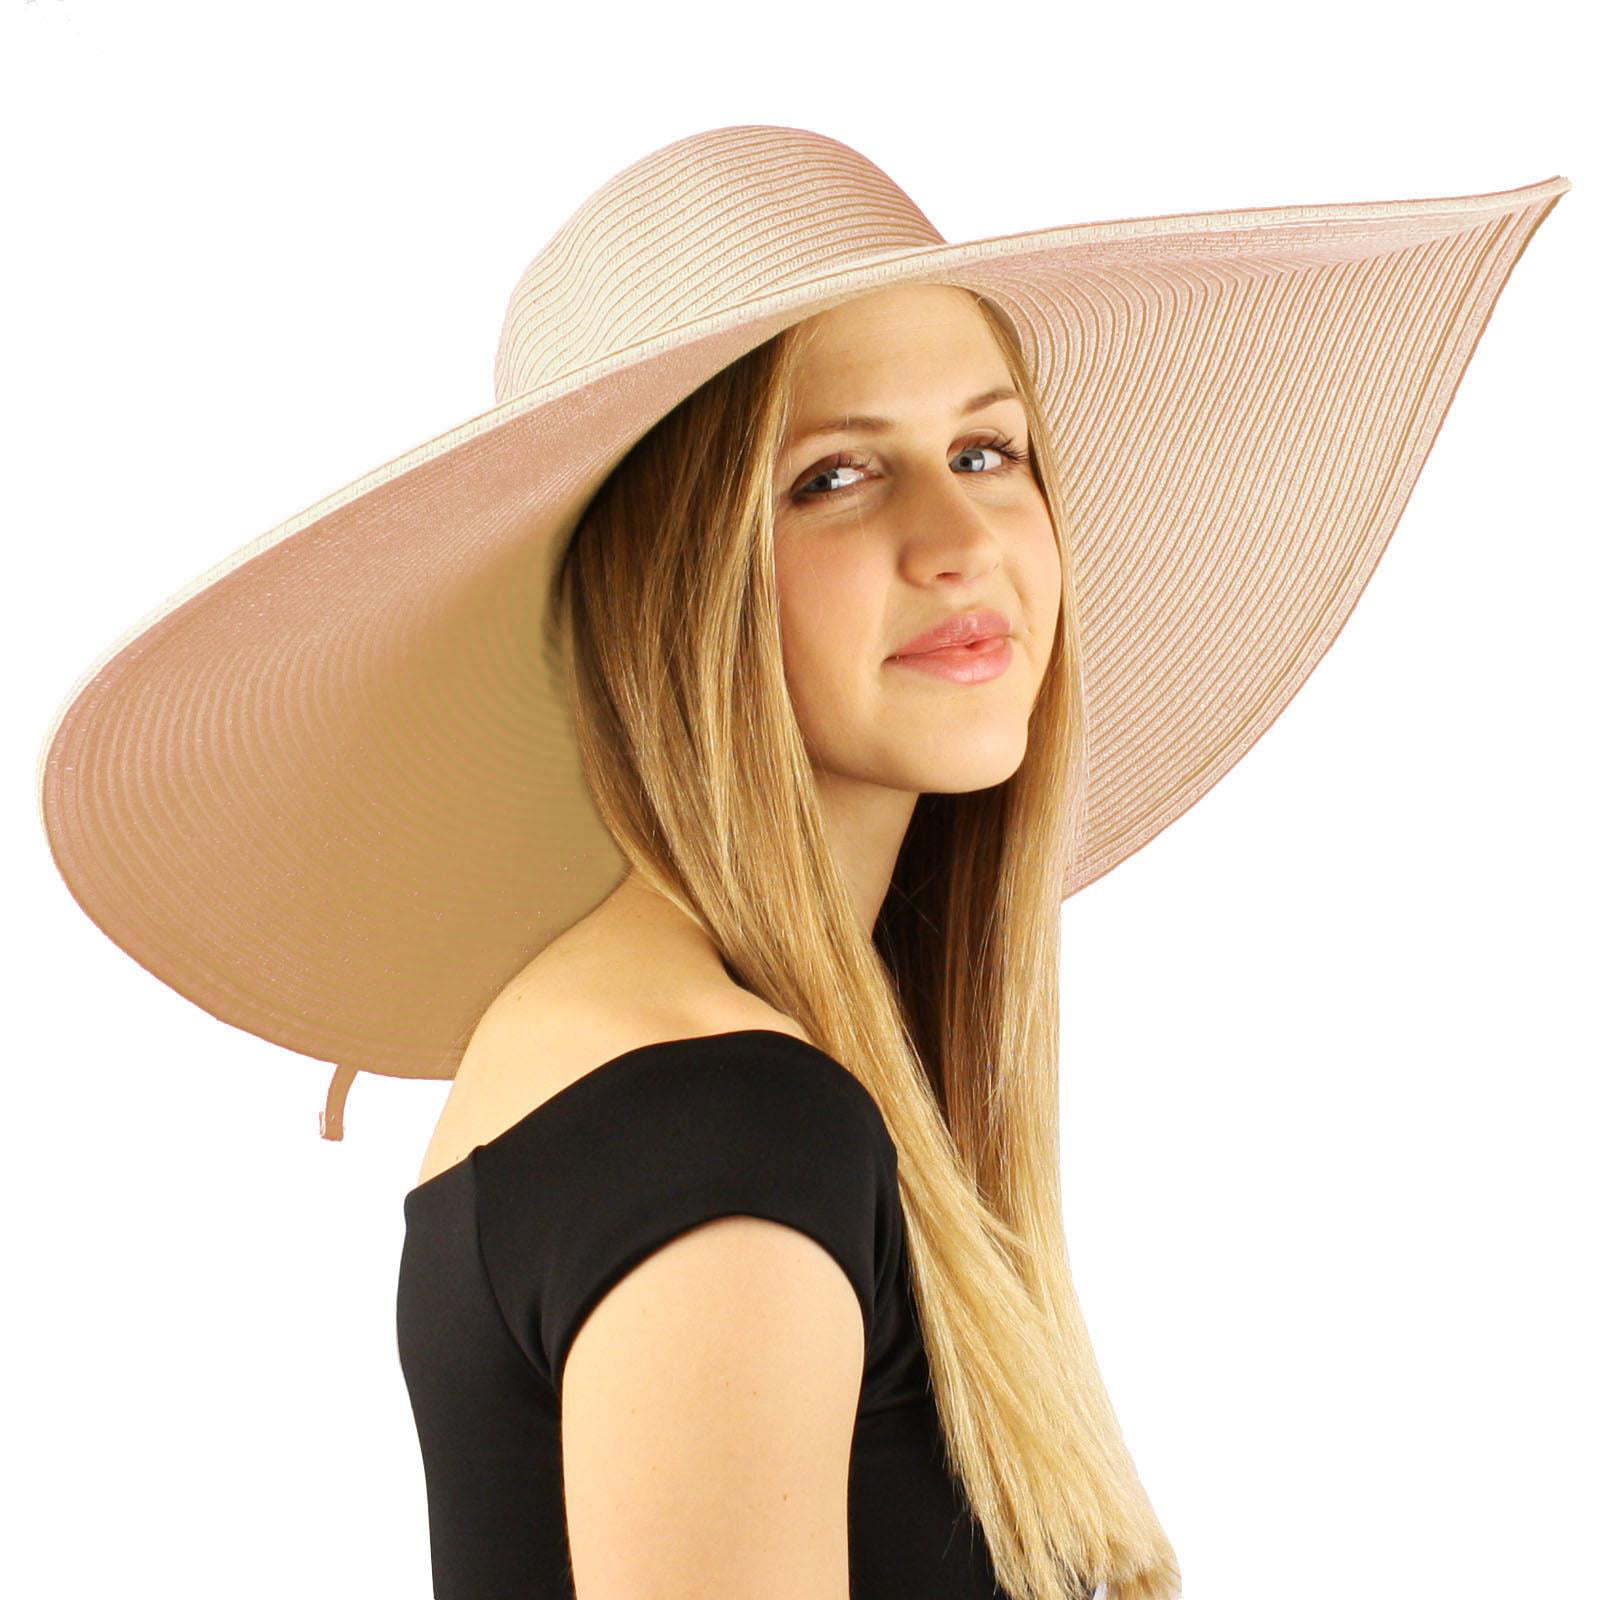 YLY 2019 Sun Hat for Women Straw Straw Hat Spring Summer Ladies Flat Top Visor Holiday Travel Sun Hat Couple Beach Hat 